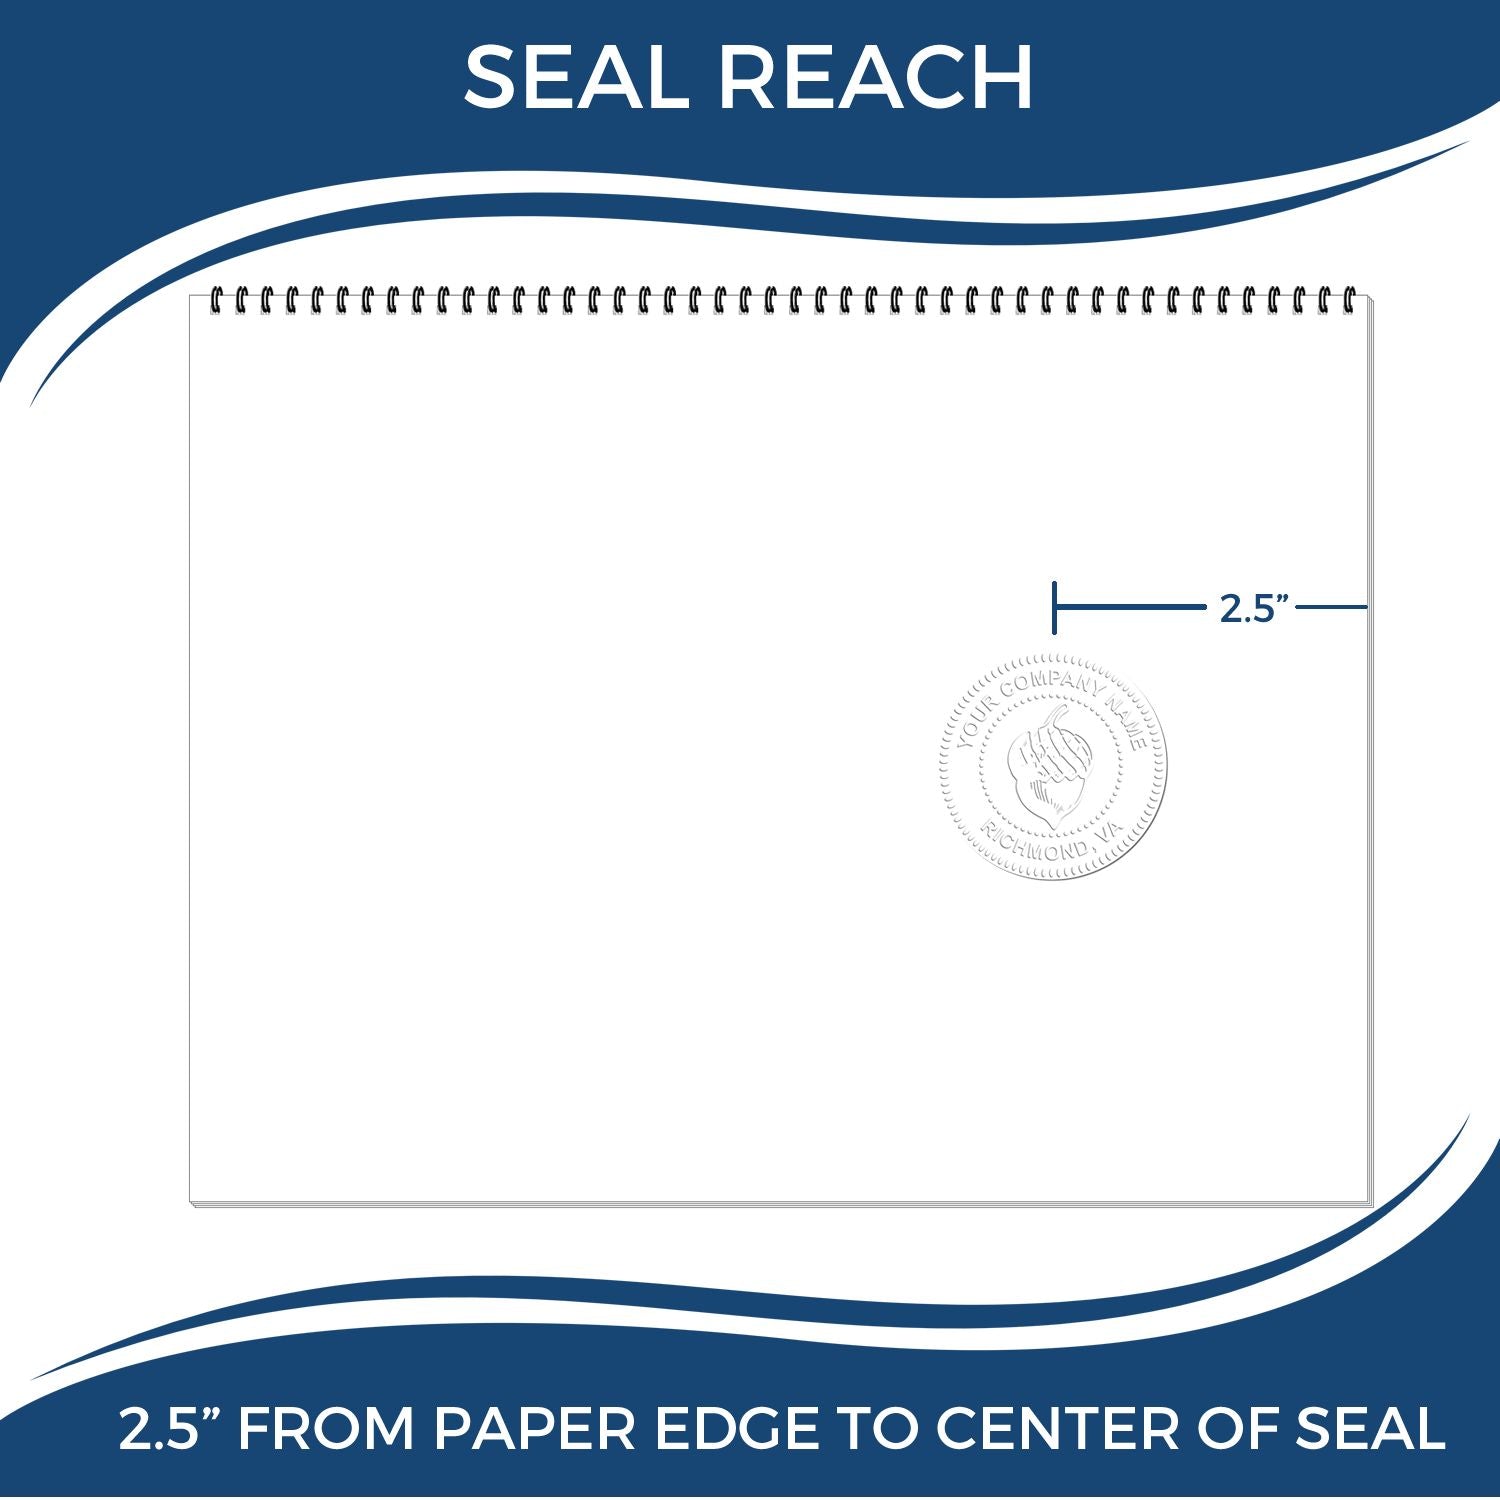 An infographic showing the seal reach which is represented by a ruler and a miniature seal image of the Long Reach Texas PE Seal